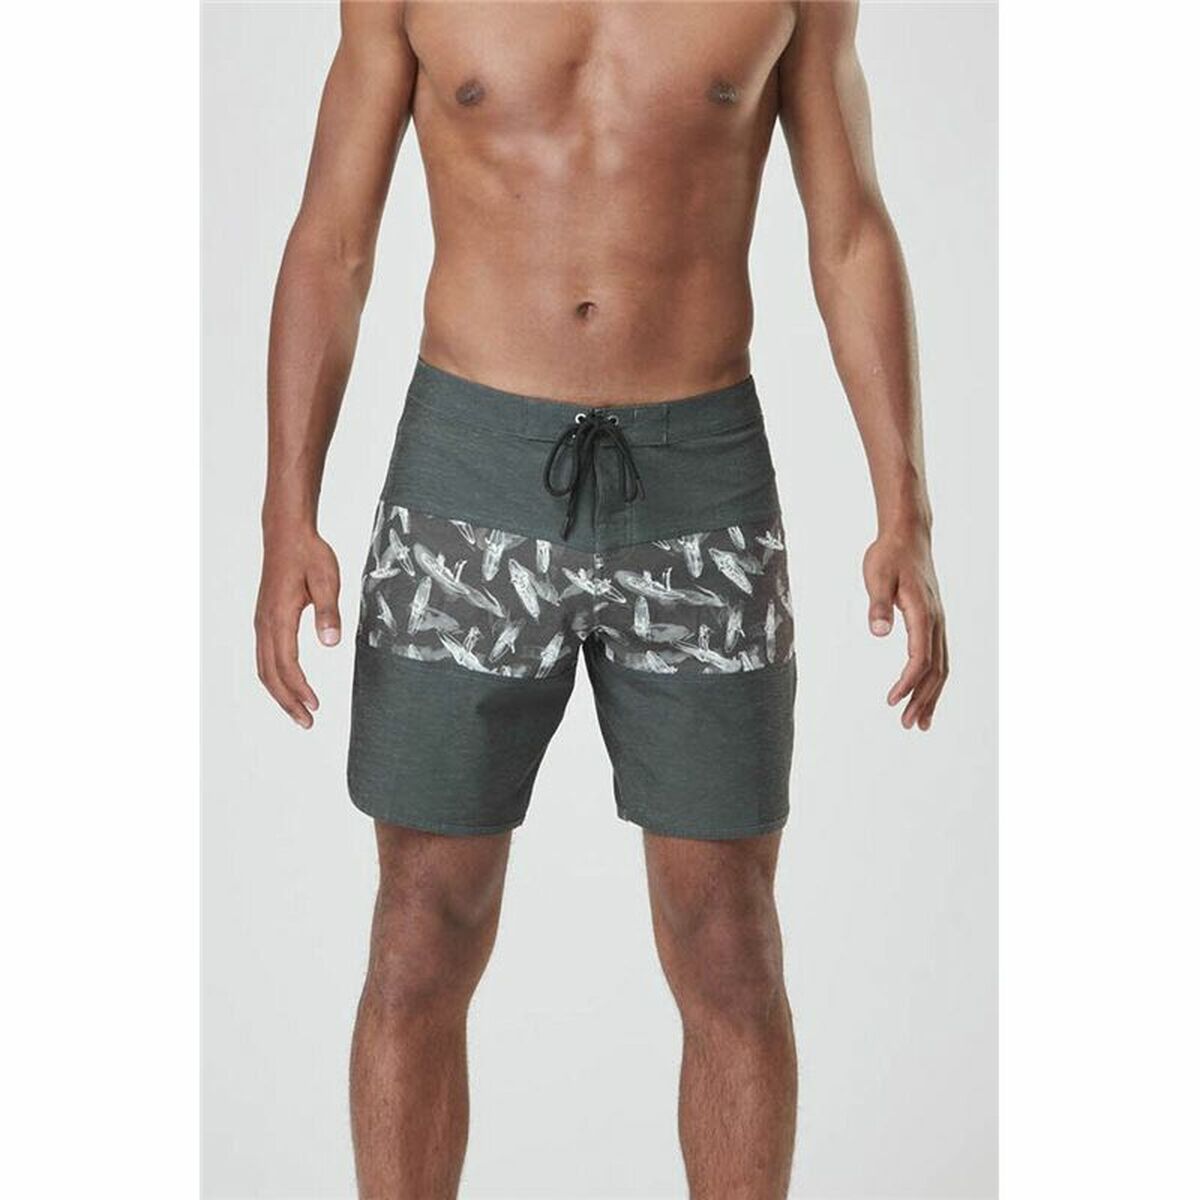 Herren Badehose Picture Andy H 17'' Grau